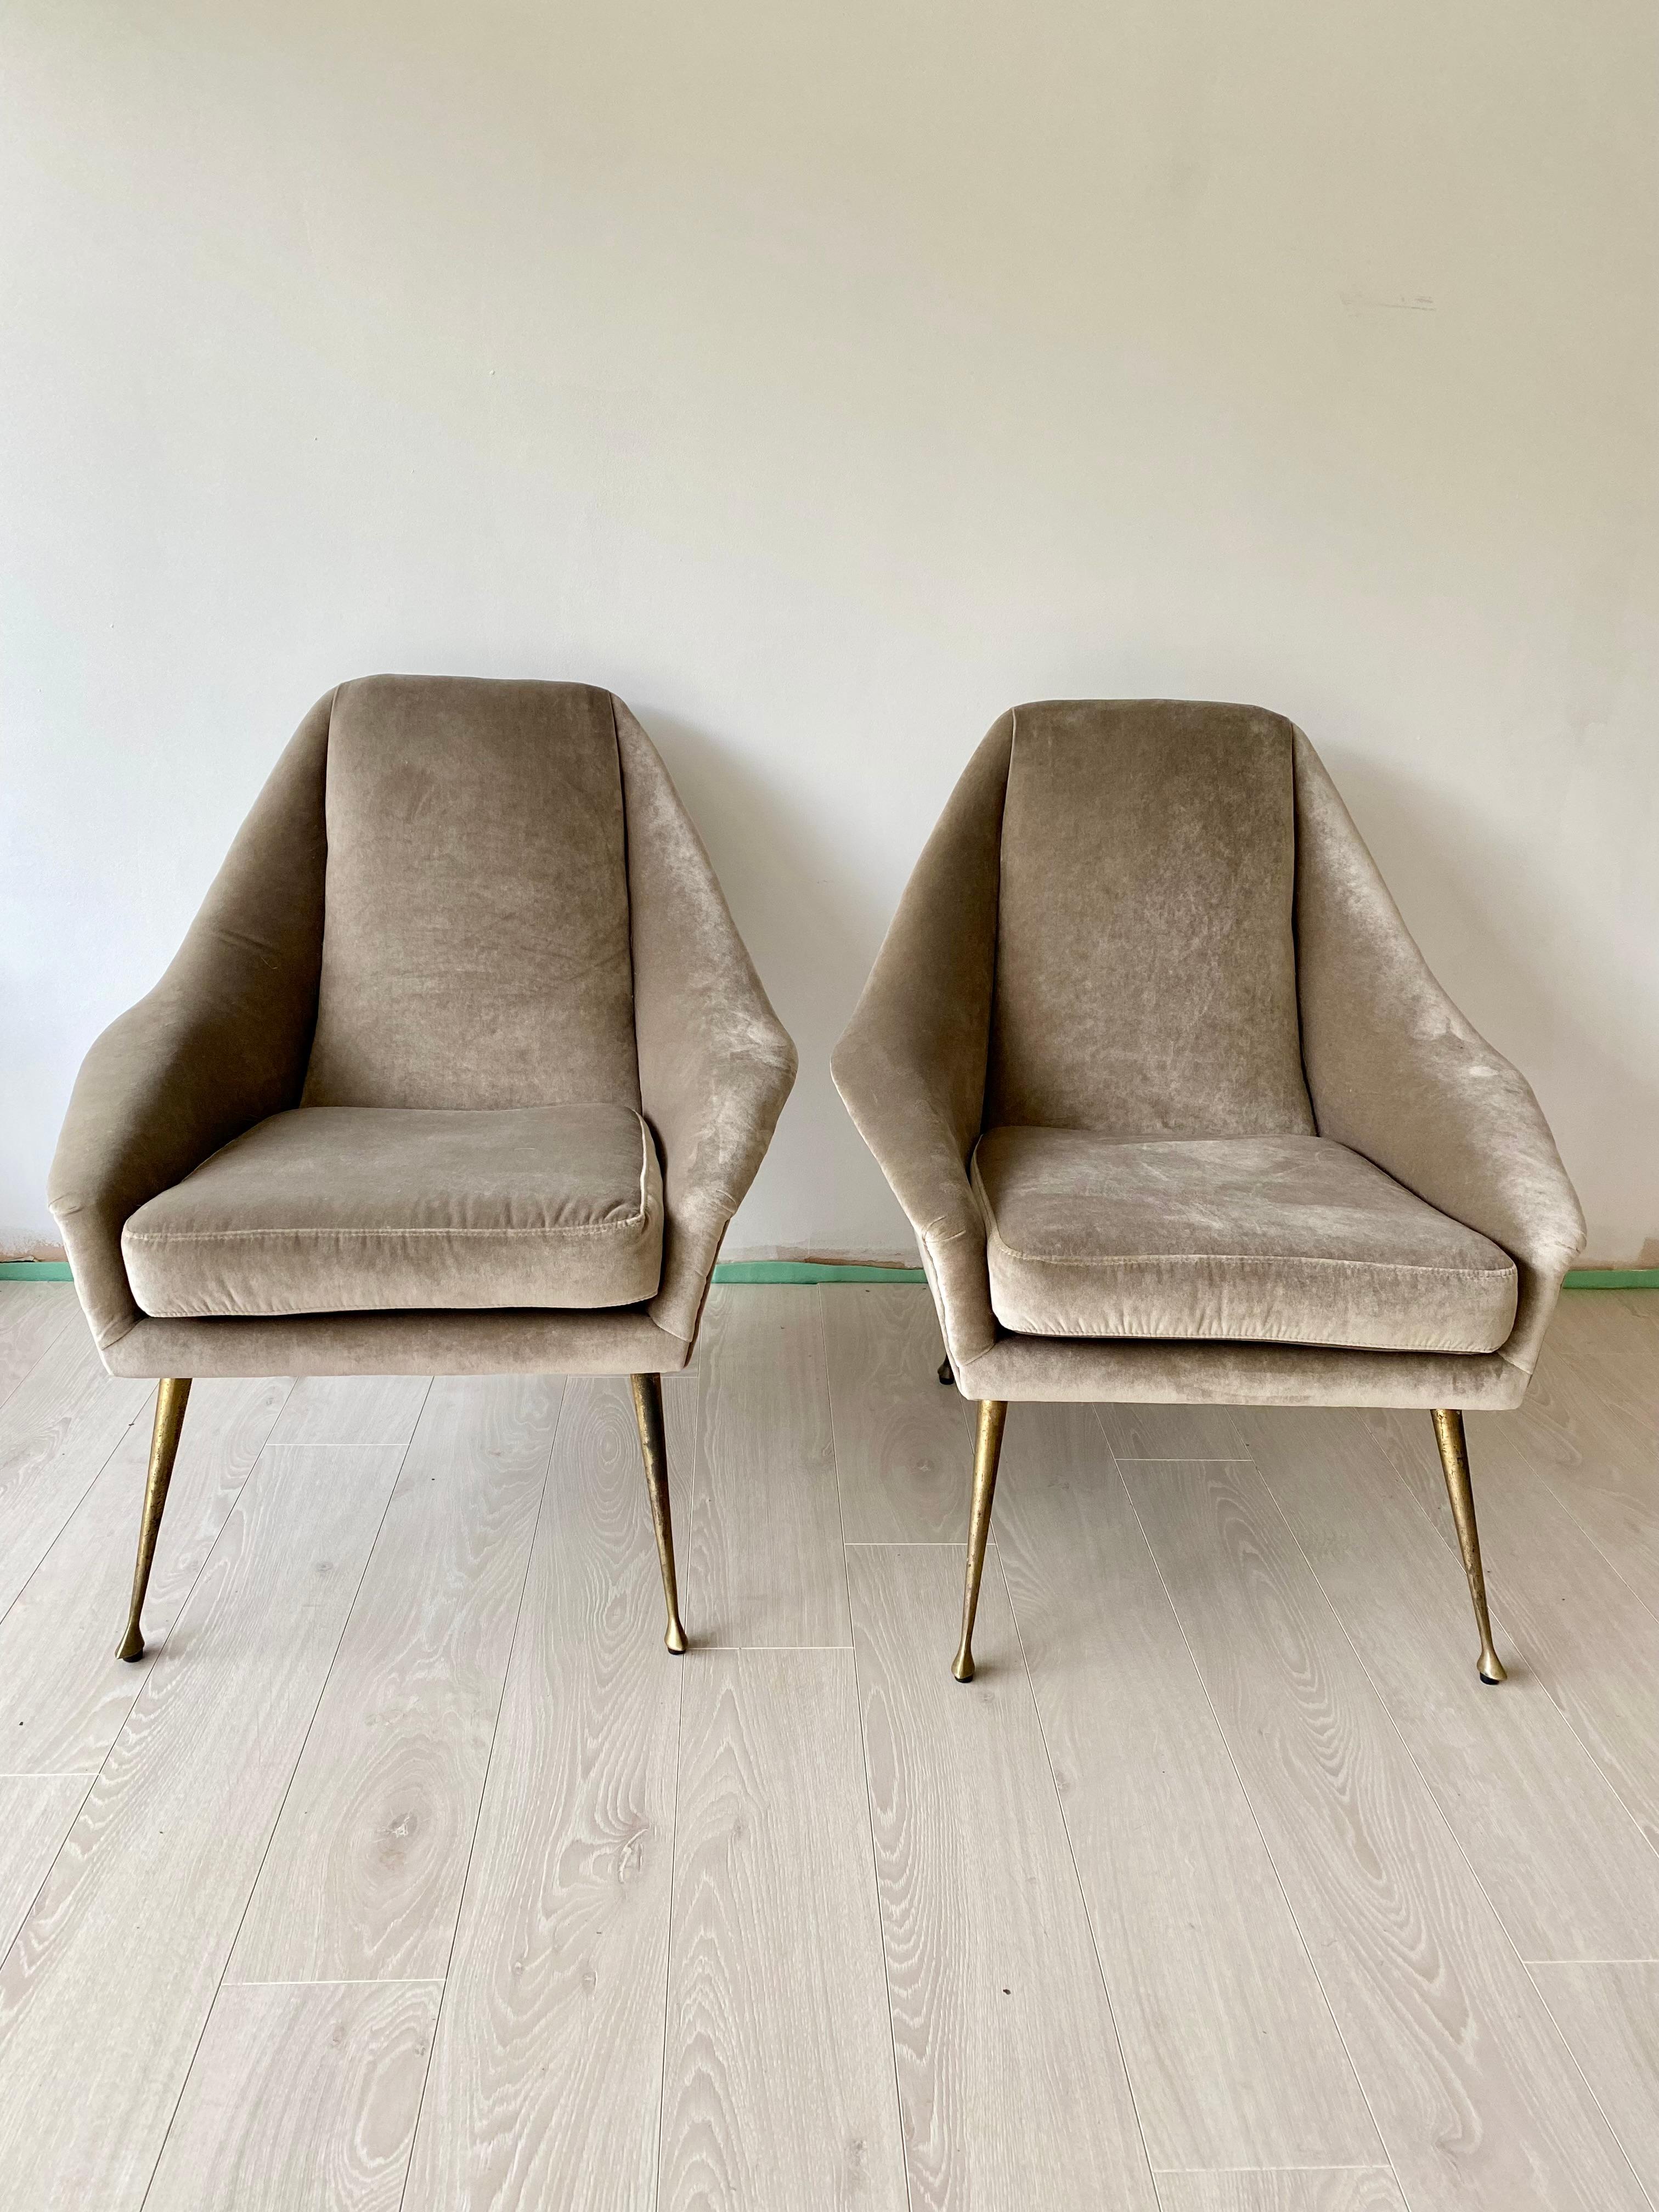 Beautiful pair of Italian chairs, slightly smaller than a traditional armchair

Upholstered in a mole grey velvet

Some small marks on seat as per close up image, otherwise in perfect order

Overall dimensions, 80cm tall, 80cm deep and 73cm